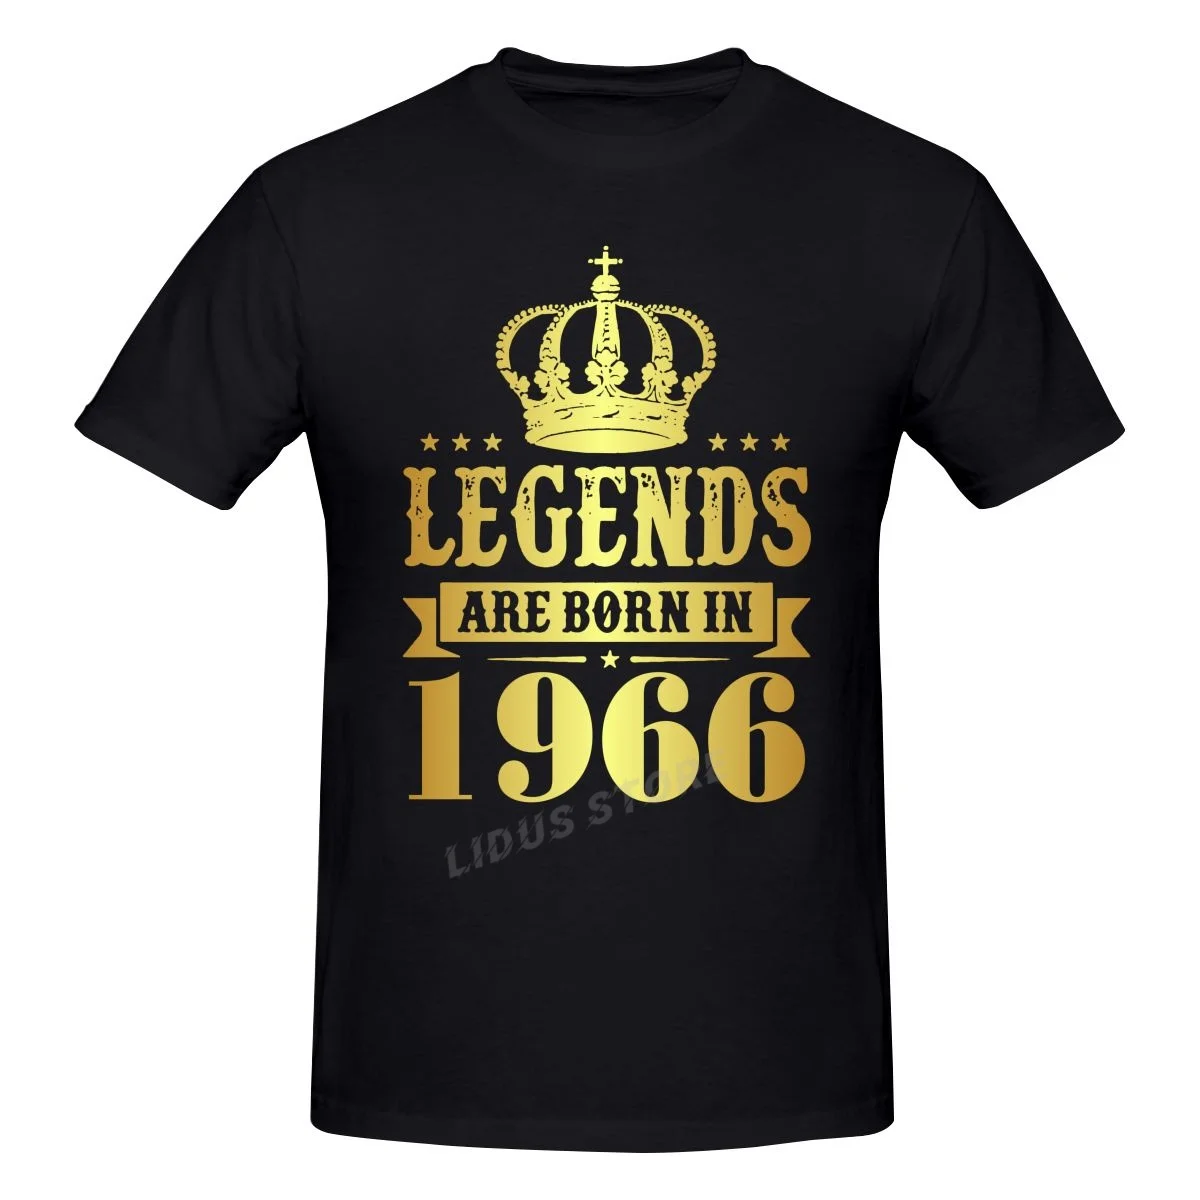 

Legends Are Born In 1966 56 Years For 56th Birthday Gift T shirt Harajuku Clothing T-shirt 100% Cotton Graphics Tshirt Tee Tops